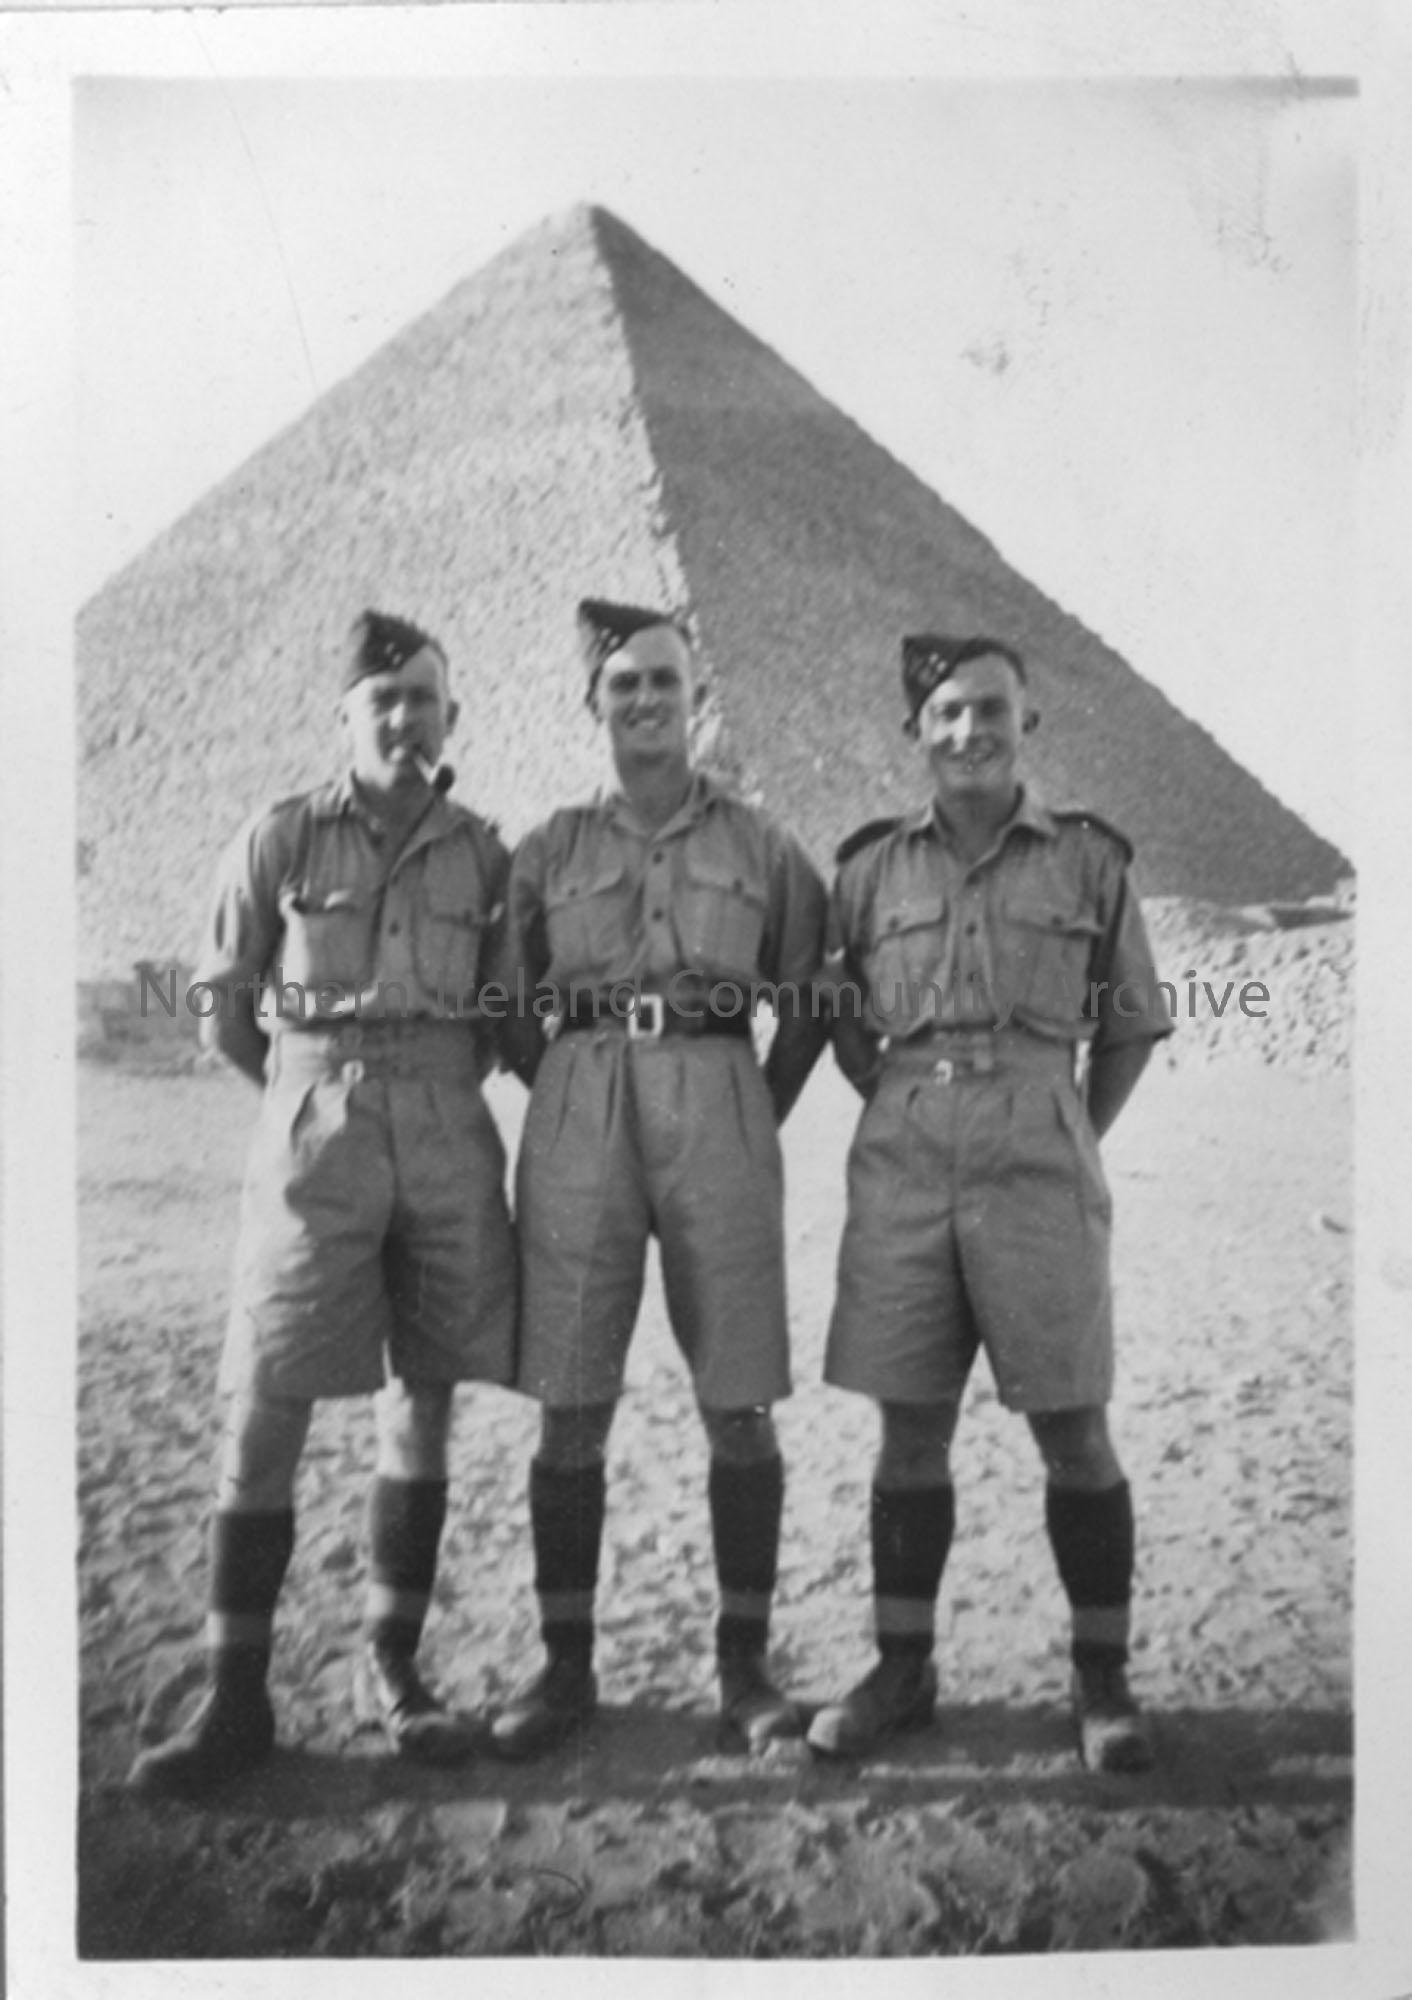 3 Brothers at the pyramids